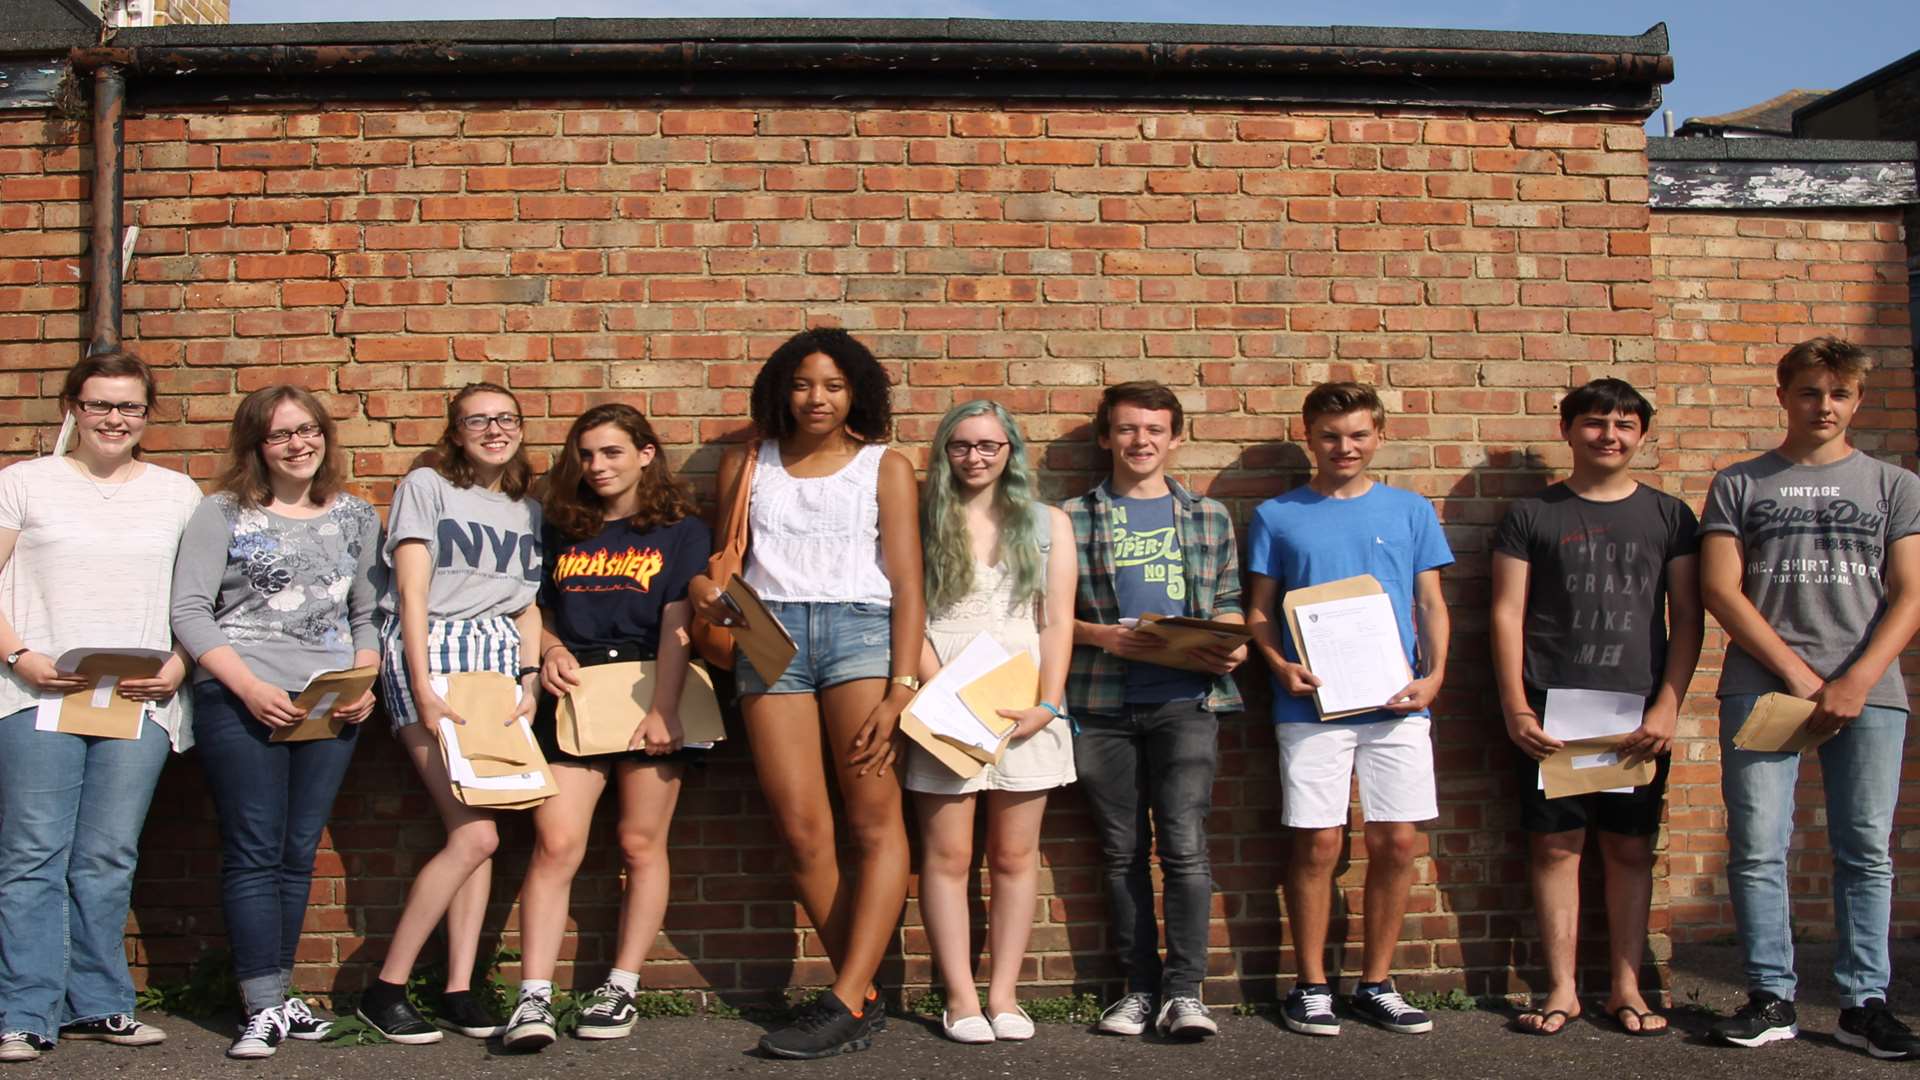 Some of the pupils at Chatham and Clarendon Grammar School in Ramsgate who achieved great GCSE results